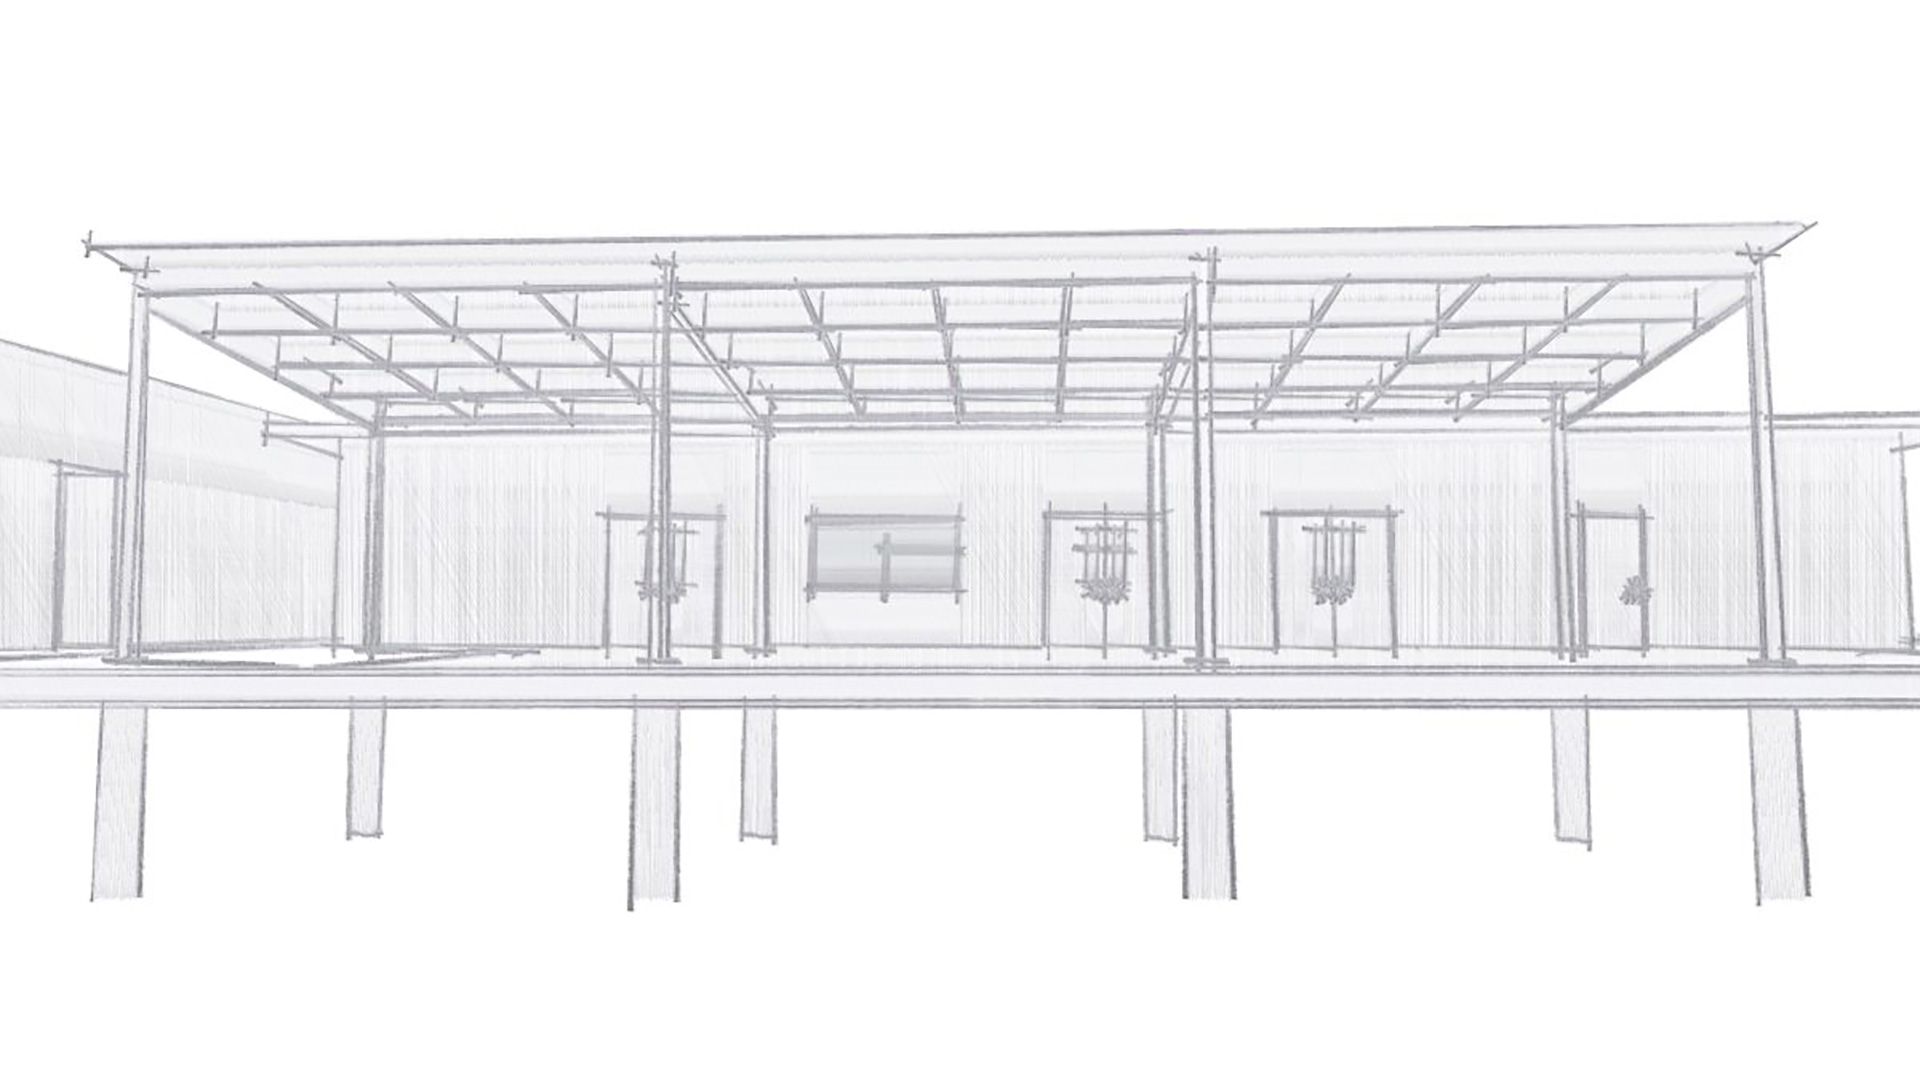 Black and white pencil sketch of shade structure in front of classrooms.